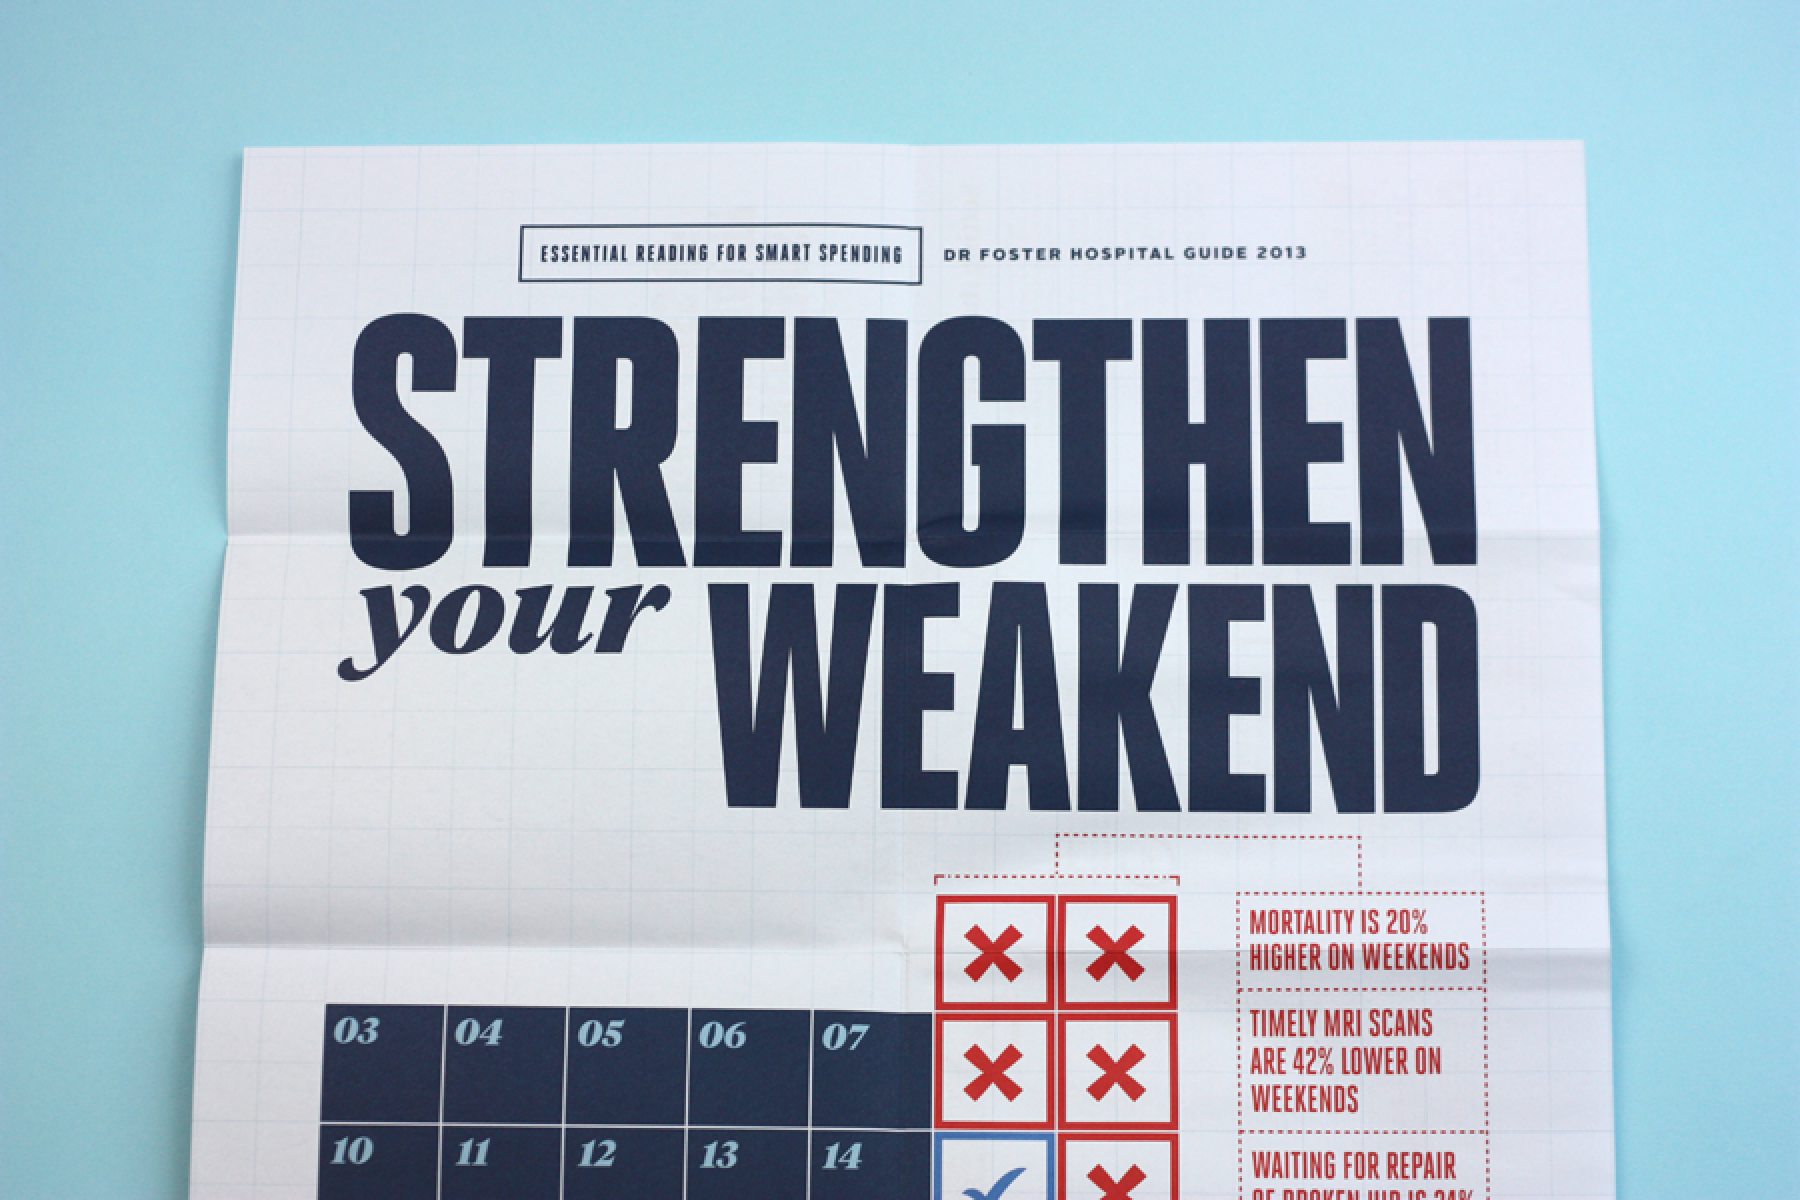 Dr Foster hospital guide poster with heading 'Strengthen your Weakend'